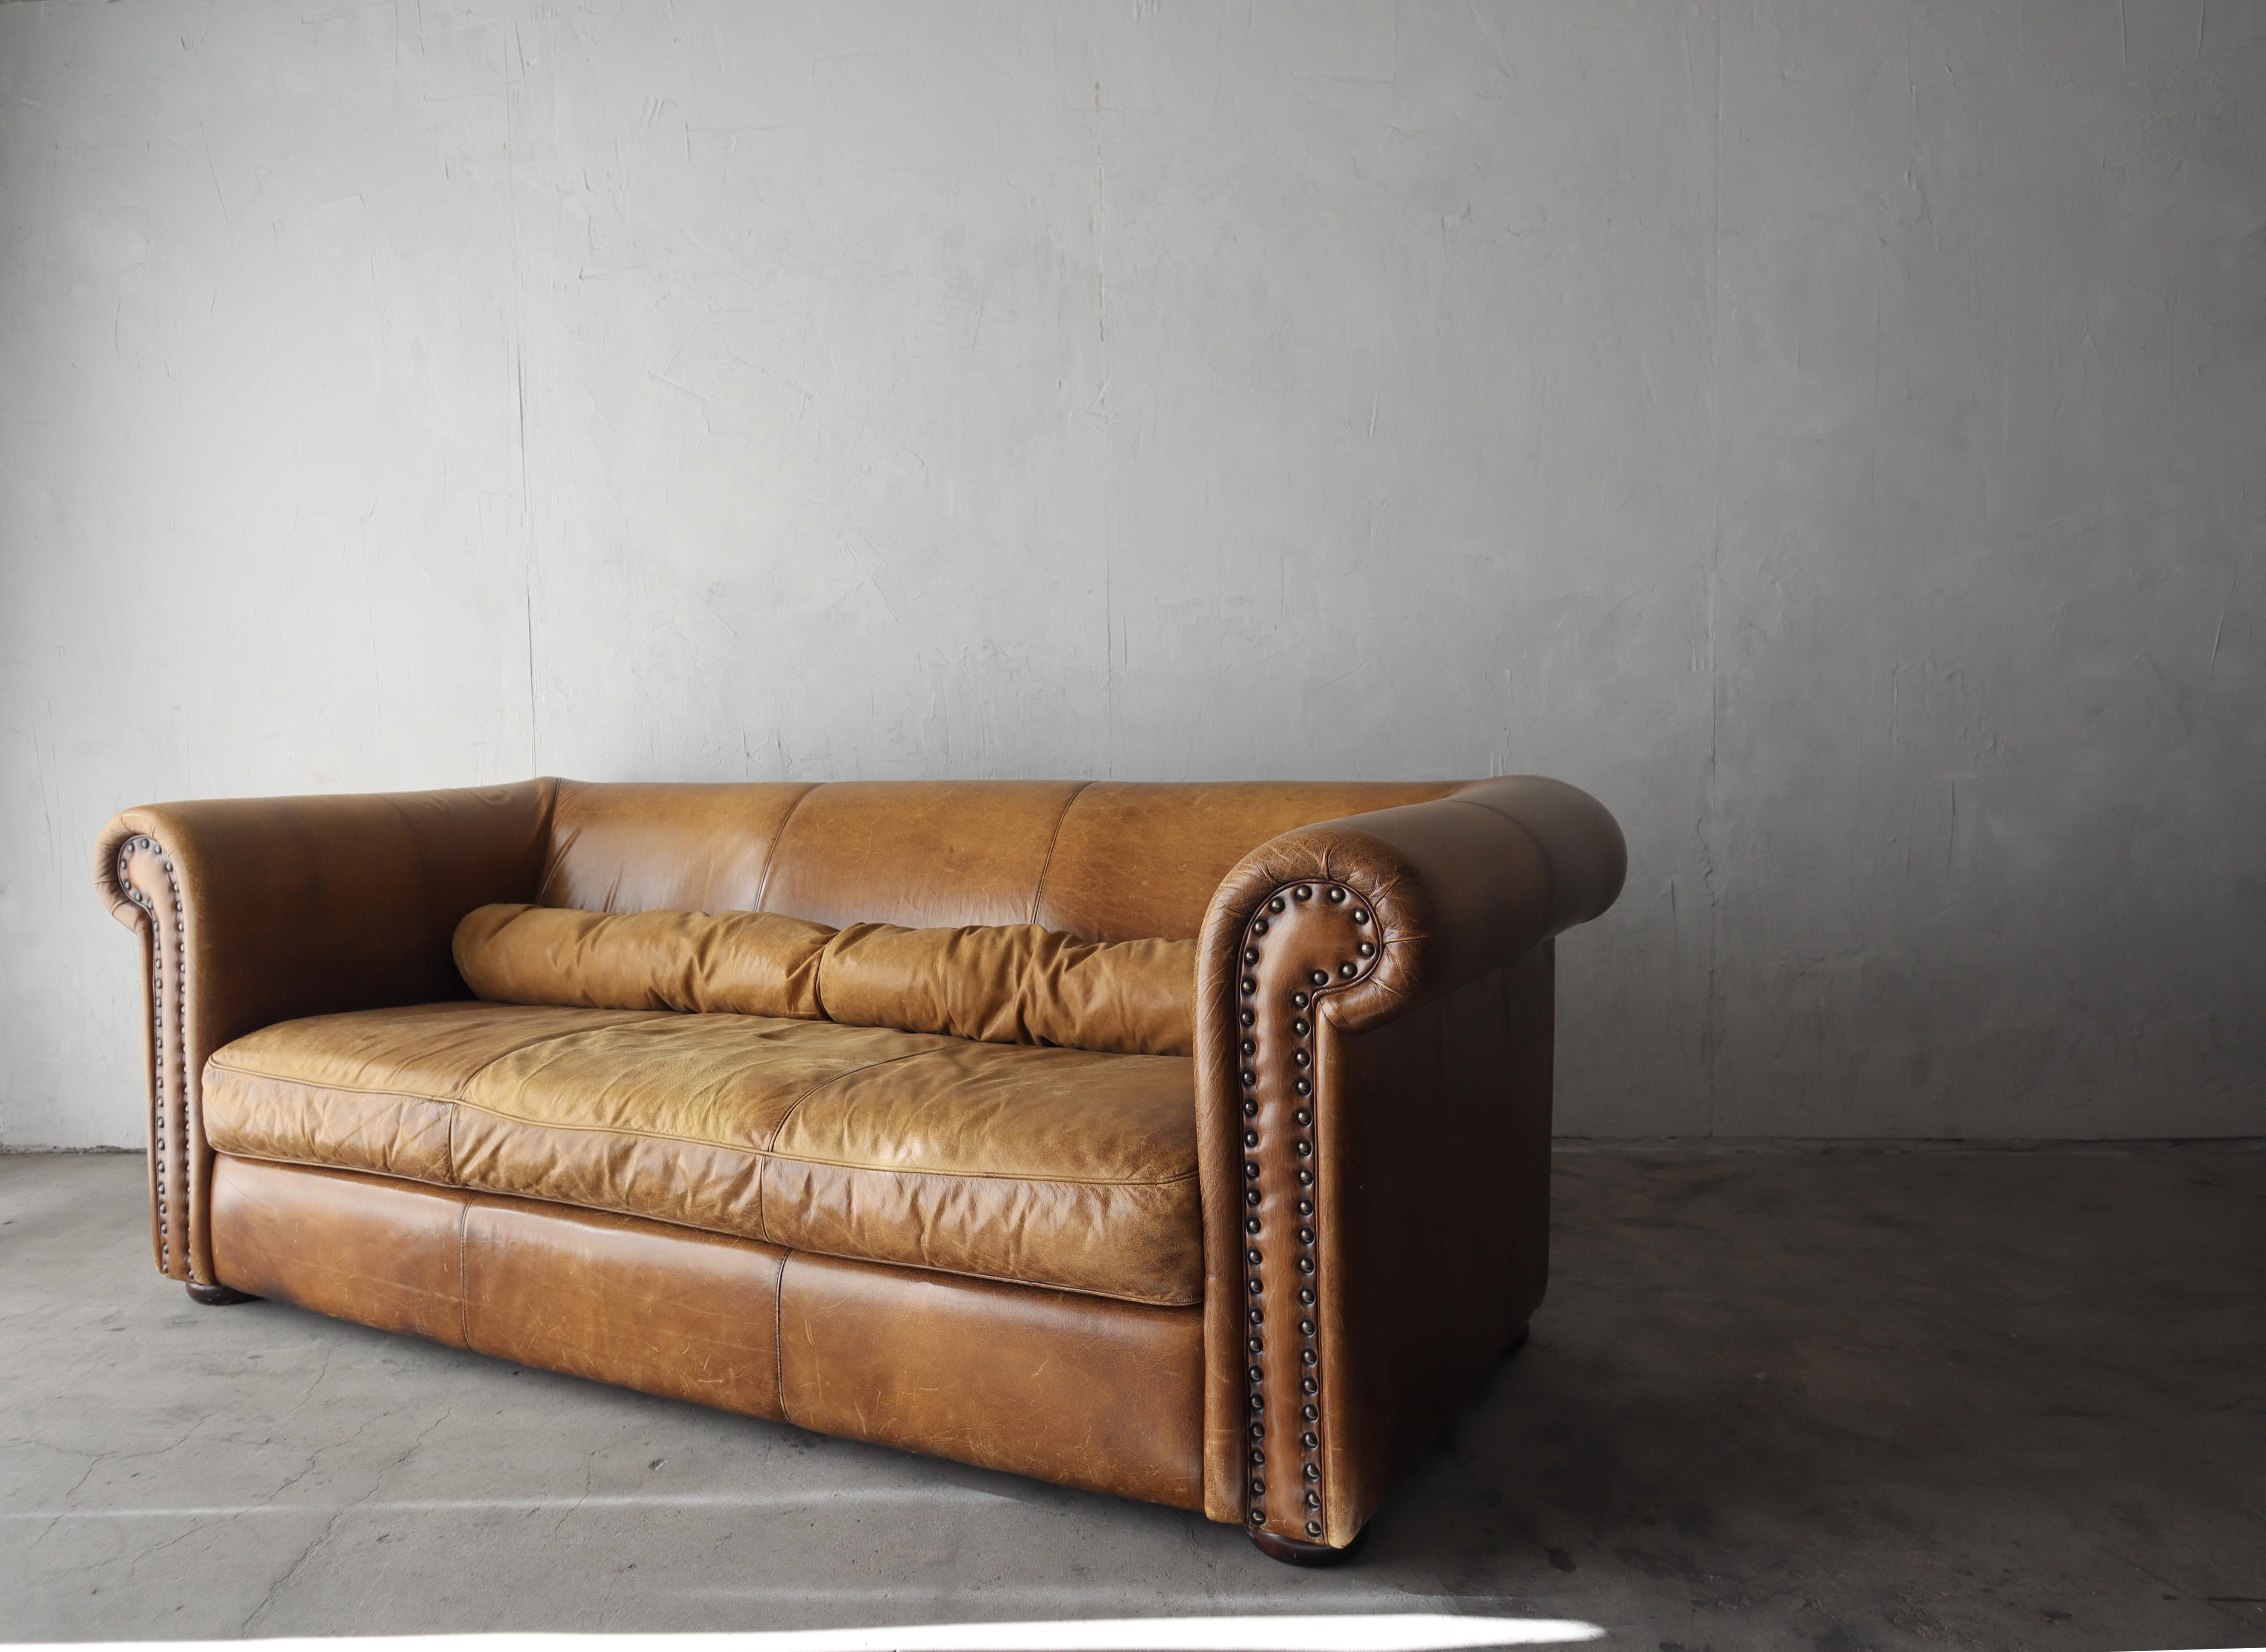 When the patina makes the piece. This incredible patinated leather sofa is ready for its next life. I envision this beauty as a store fixture or as the center of attention in a well appointed eclectic space. 

The sofa is structurally sound and